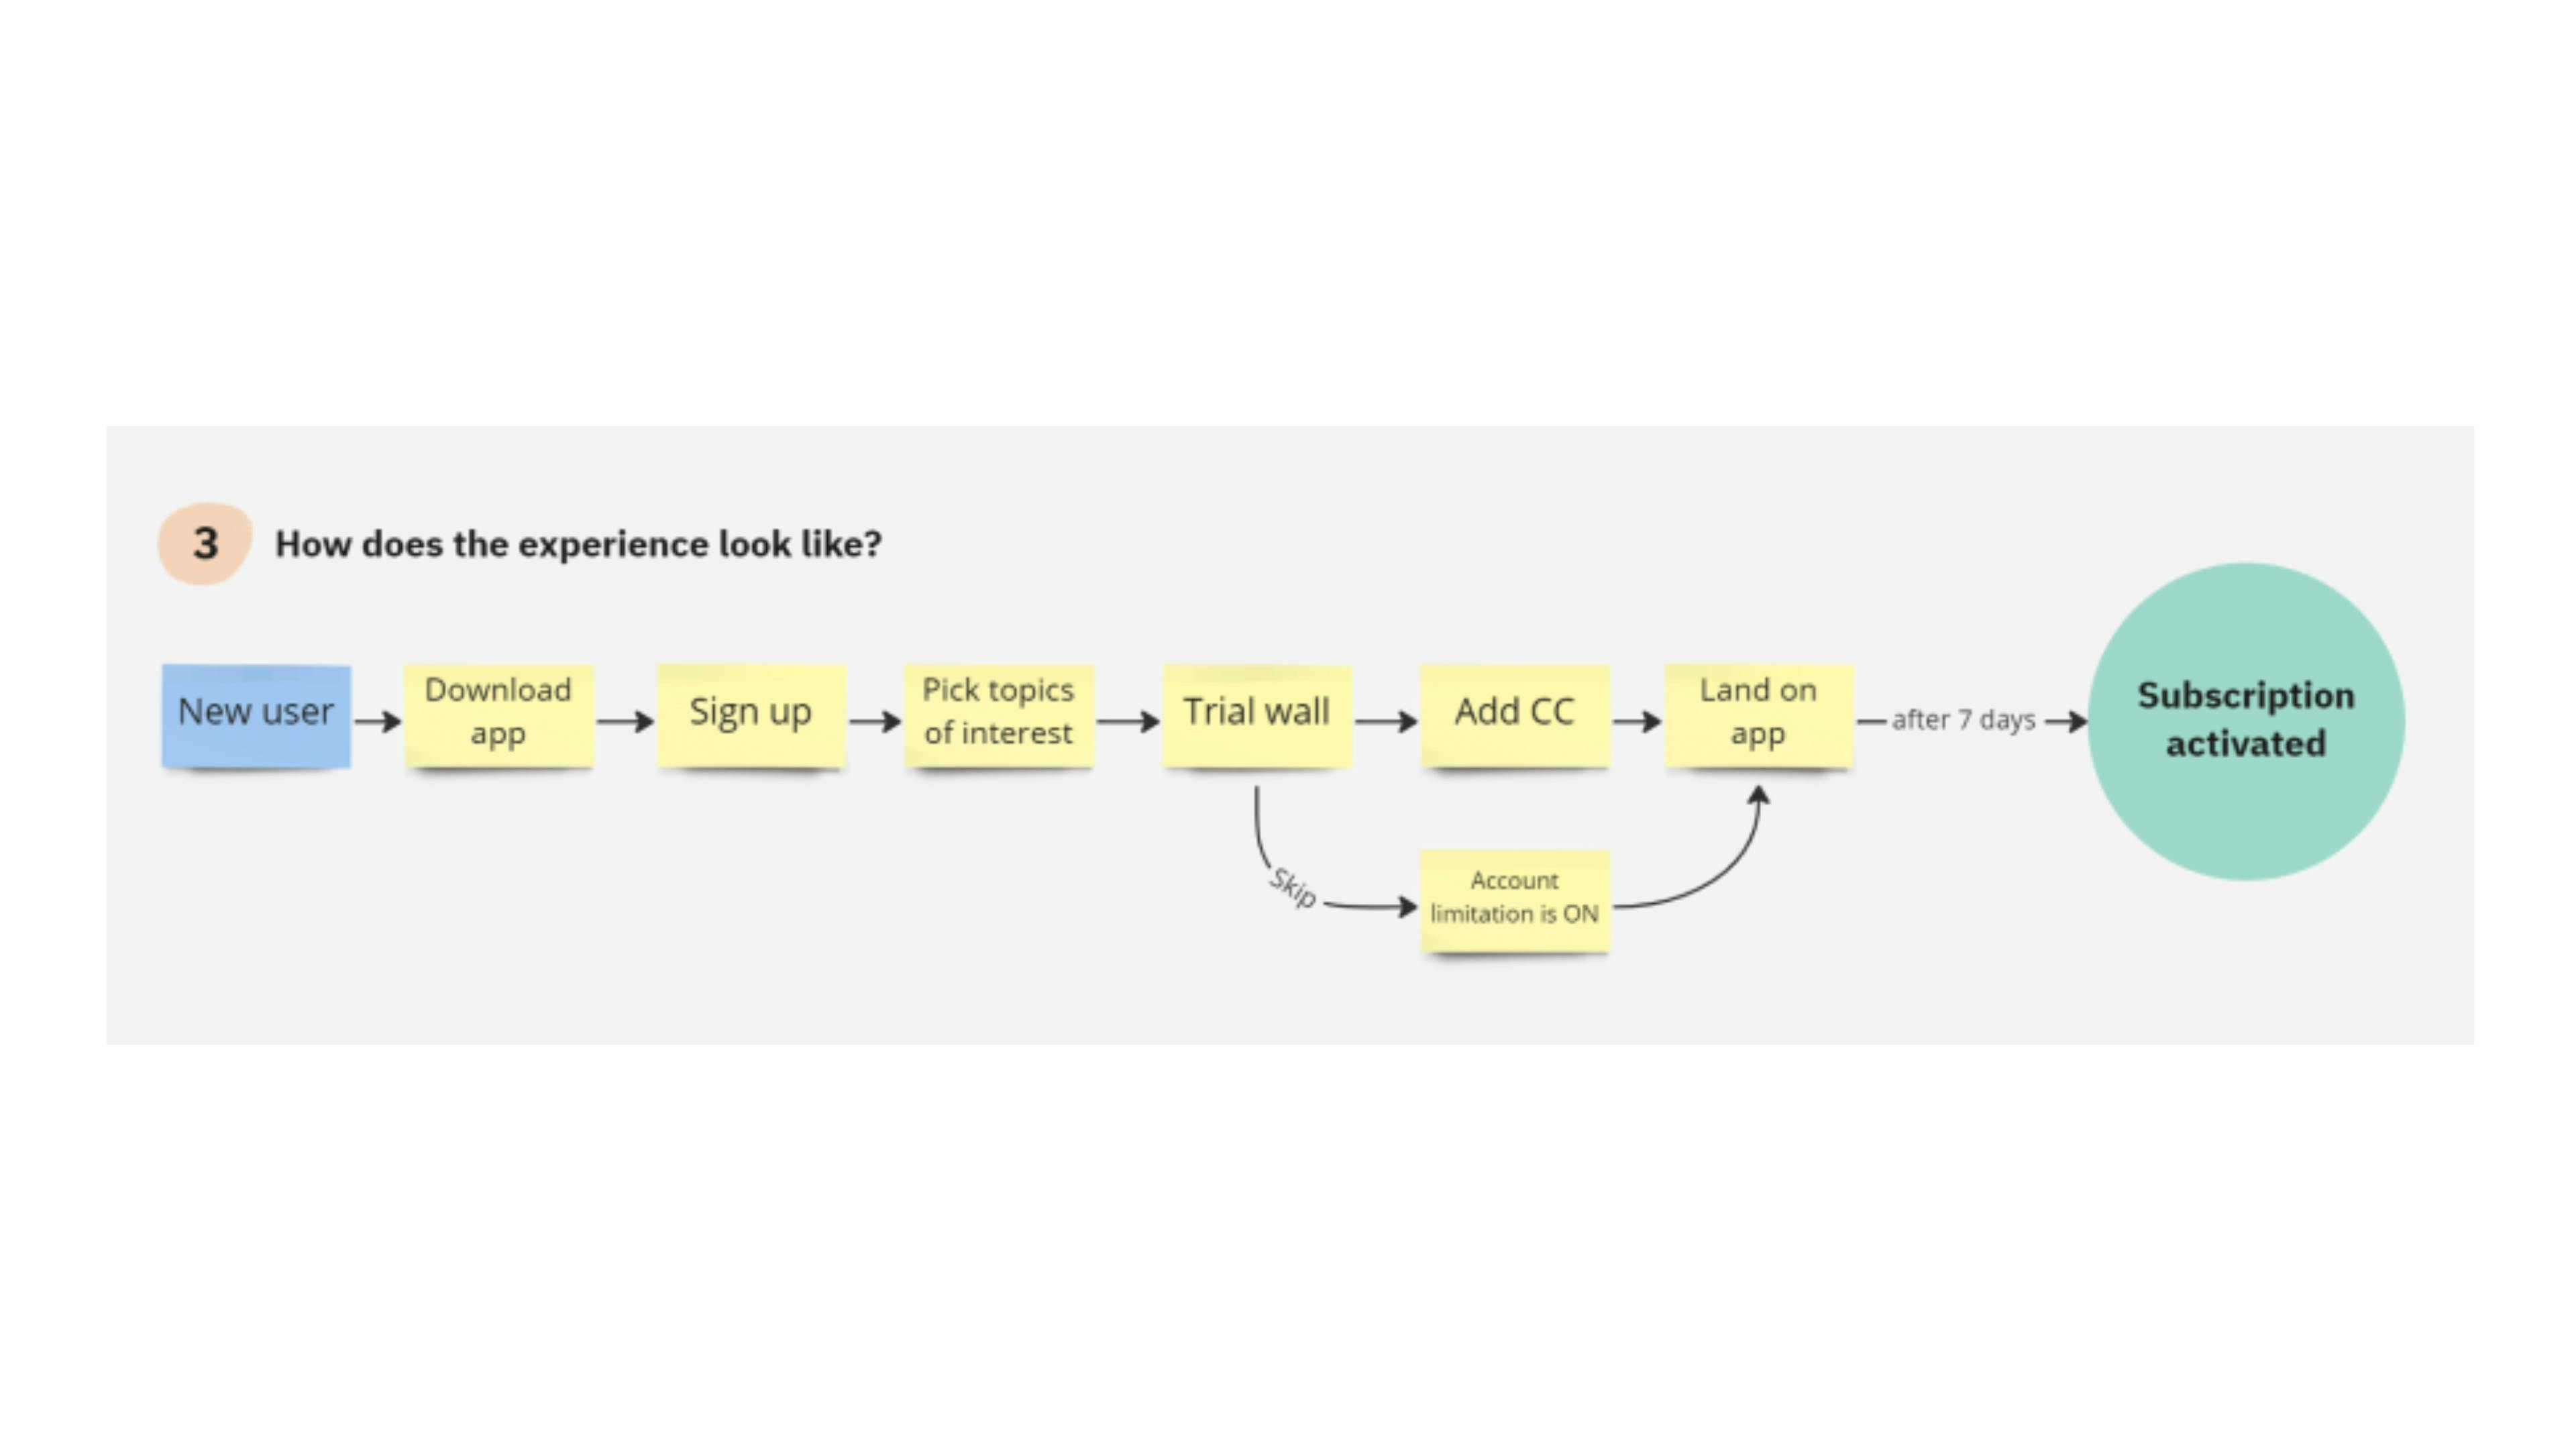 Map the user journey to get to the desired outcome